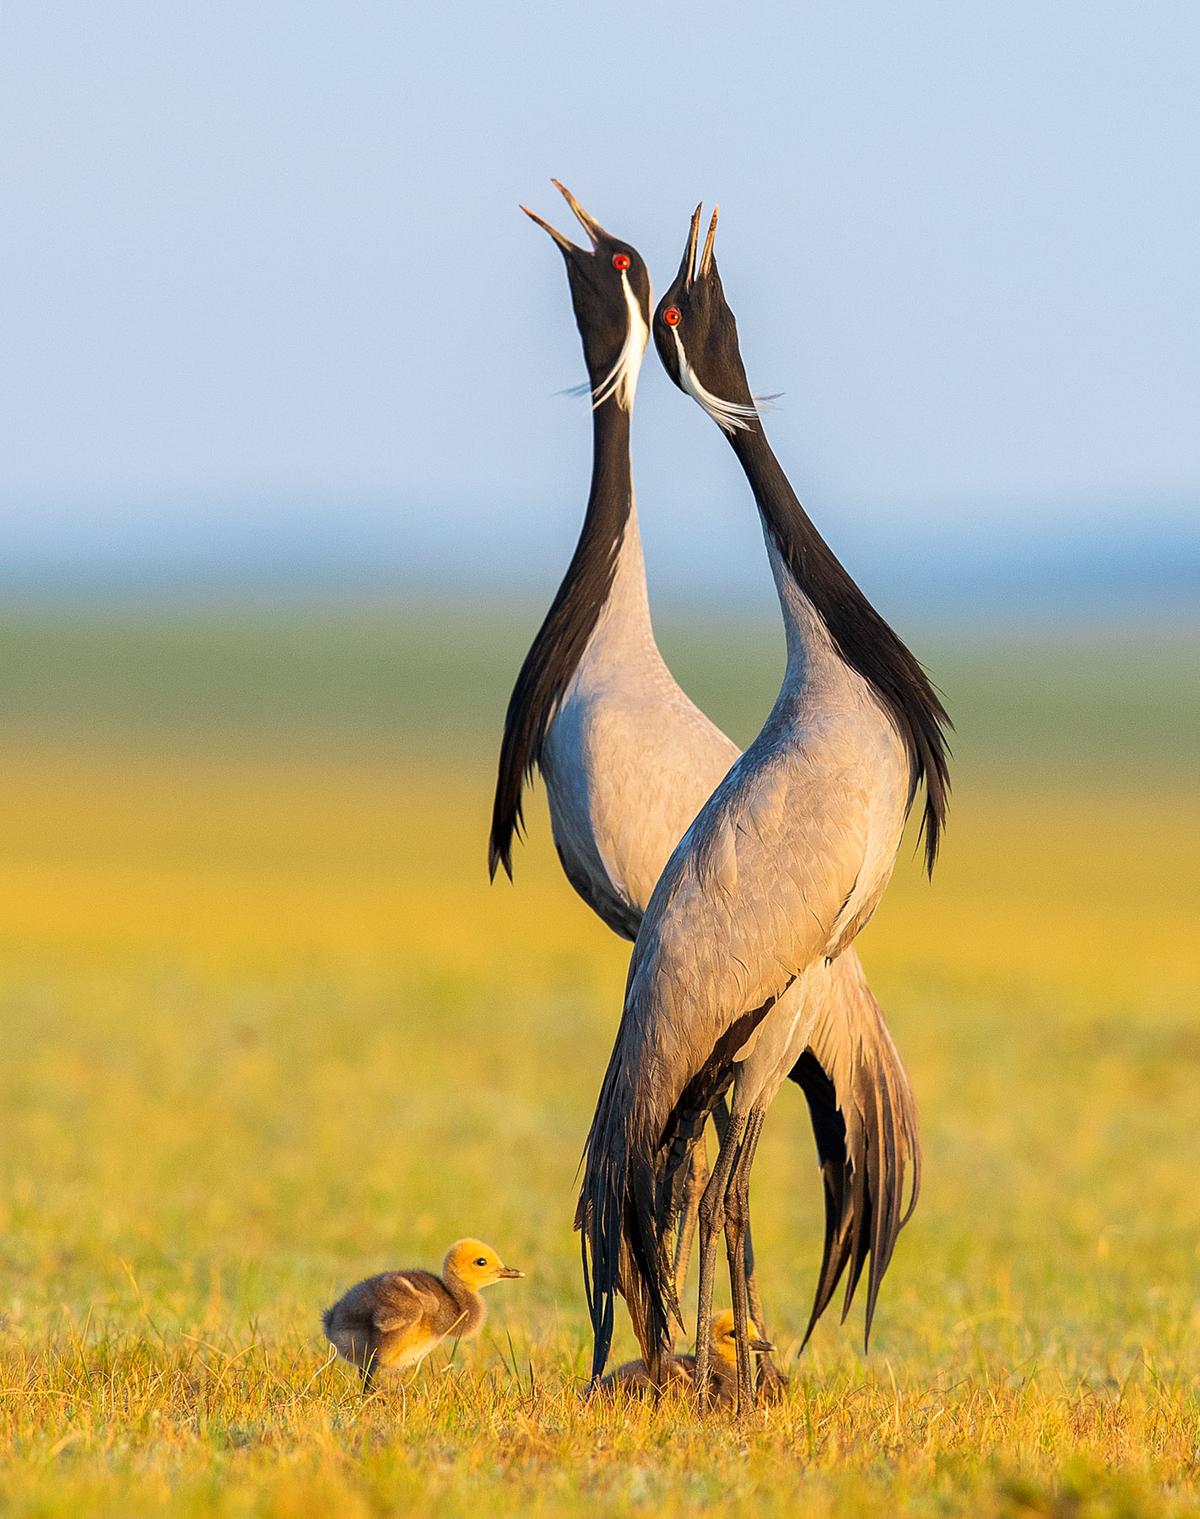 "Sing Heartily" by Maofeng Shen, China. Cranes on the vast grasslands of Keshiketeng during June mating season in Inner Mongolia. (©Maofeng Shen/<a href="http://www.birdpoty.com/">Bird Photographer of the Year</a>)